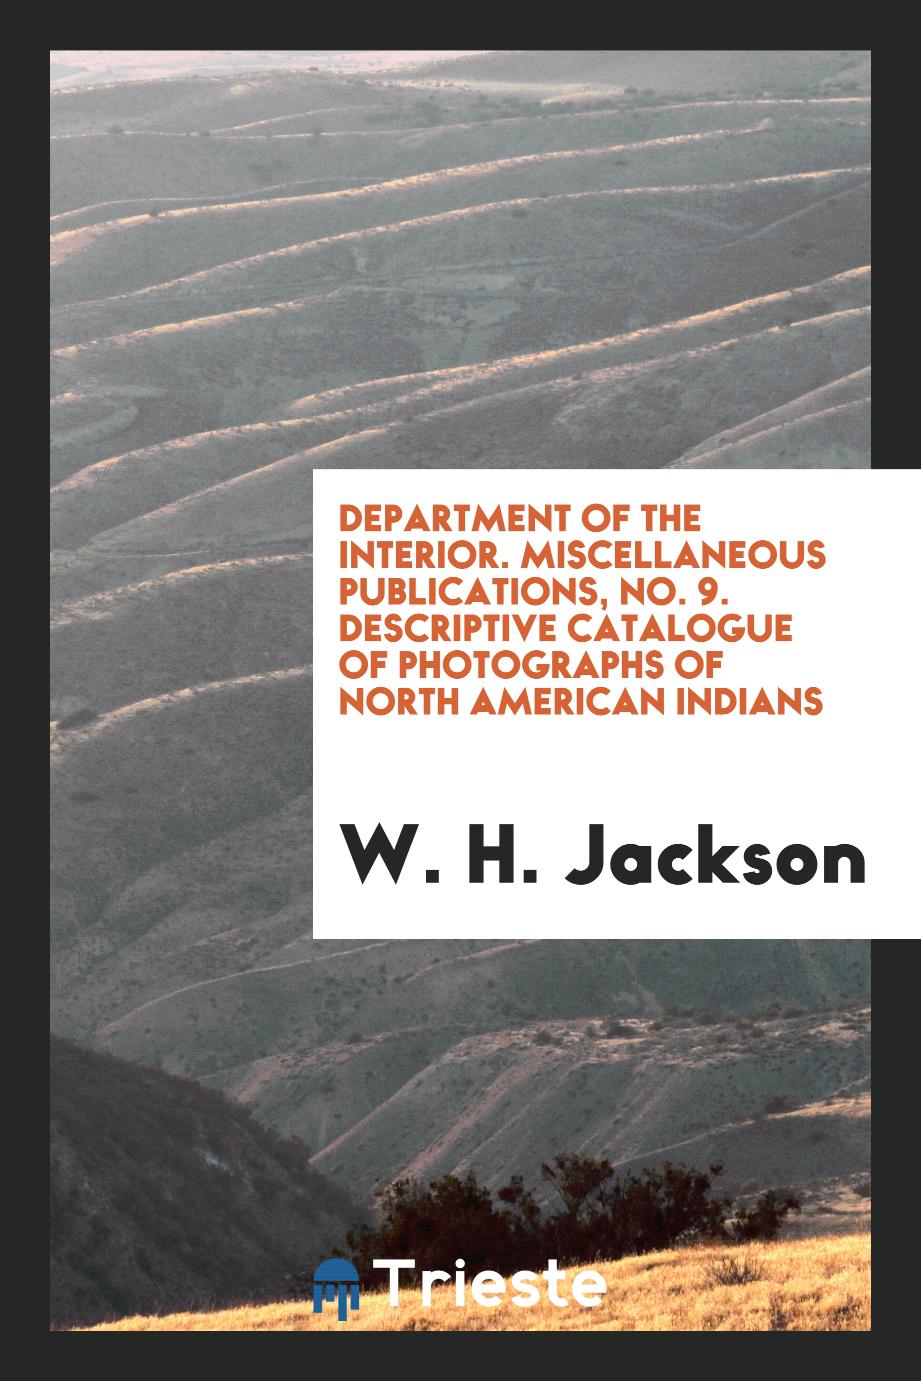 Department of the Interior. Miscellaneous Publications, No. 9. Descriptive Catalogue of Photographs of North American Indians